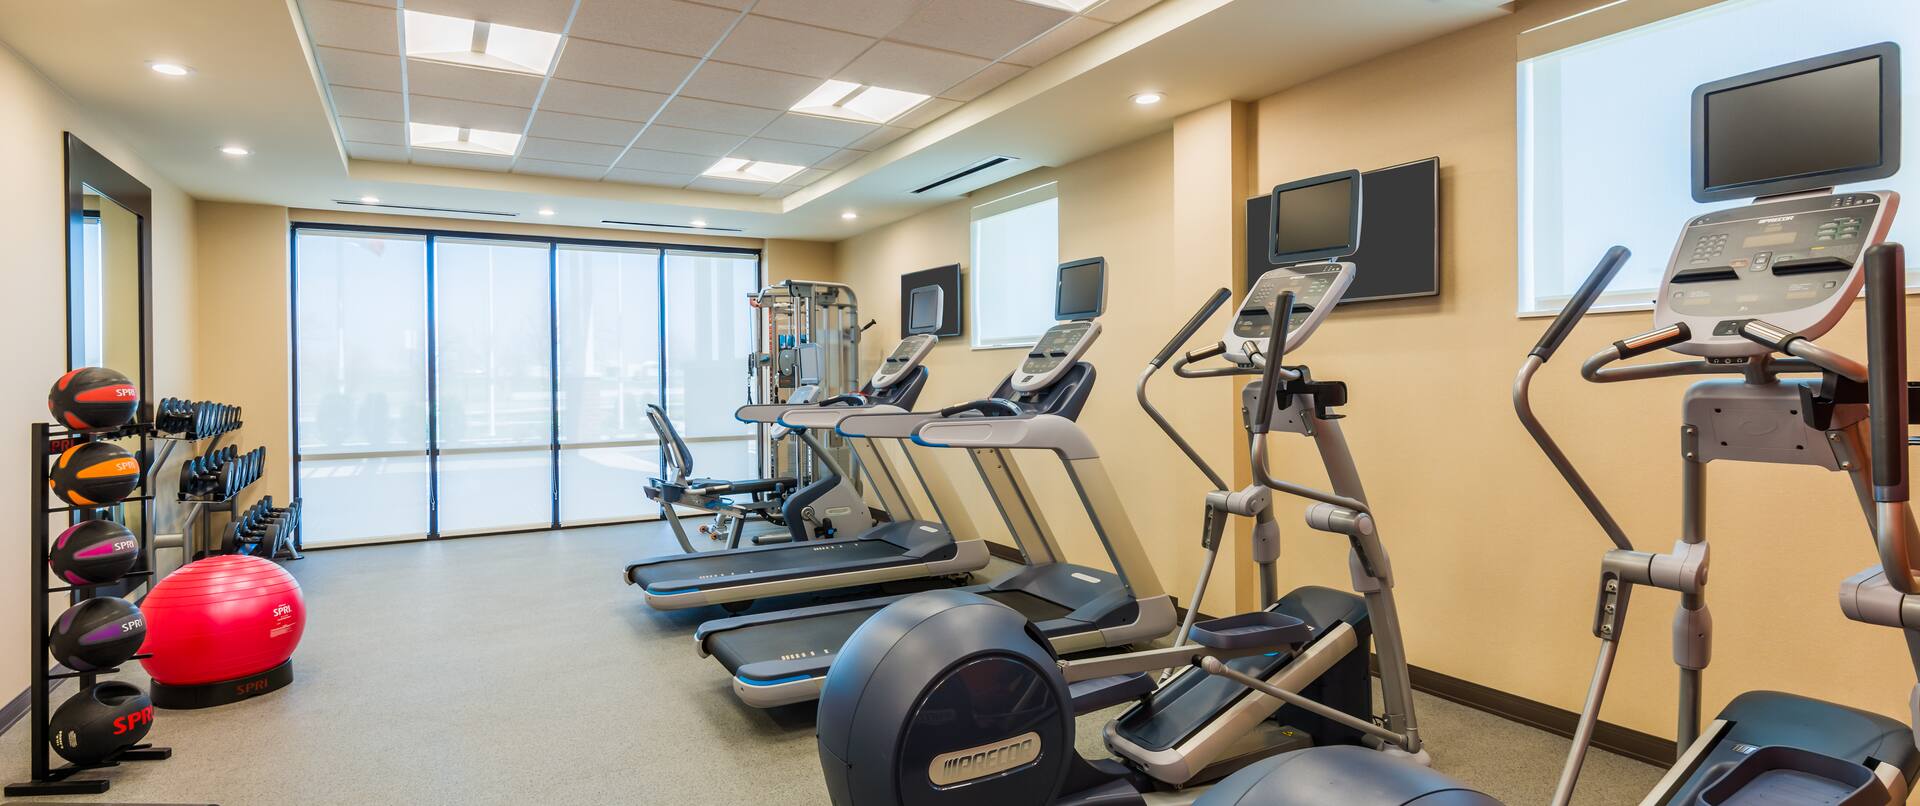 Home2 Suites by Hilton Buffalo Airport/ Galleria Mall Hotel, NY - Fitness Center